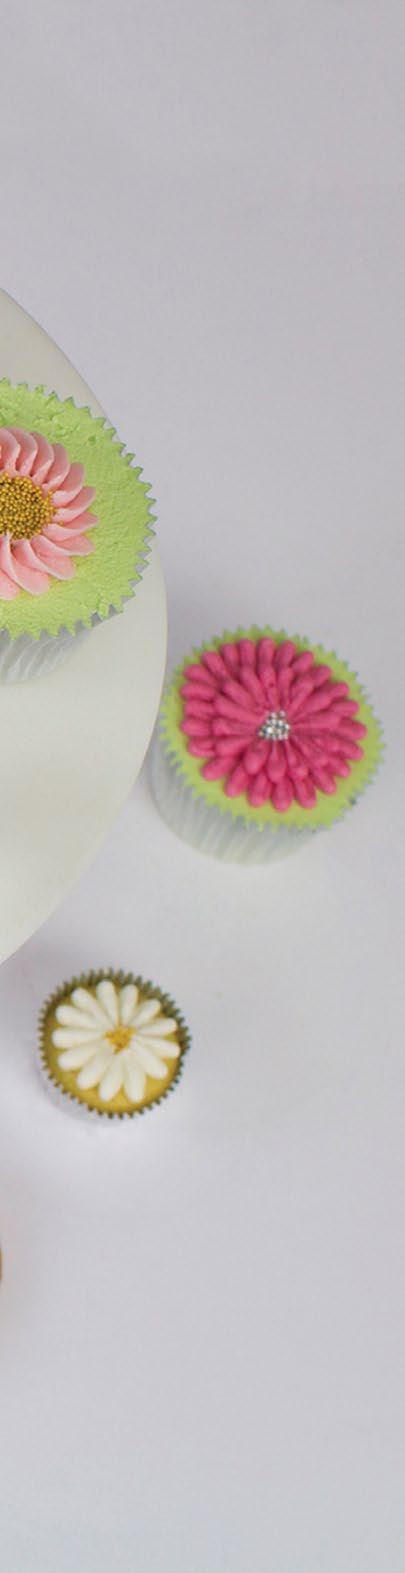 Floral Extravaganza You will Need 6 to 12 cupcakes or 24 mini cupcakes or biscuits